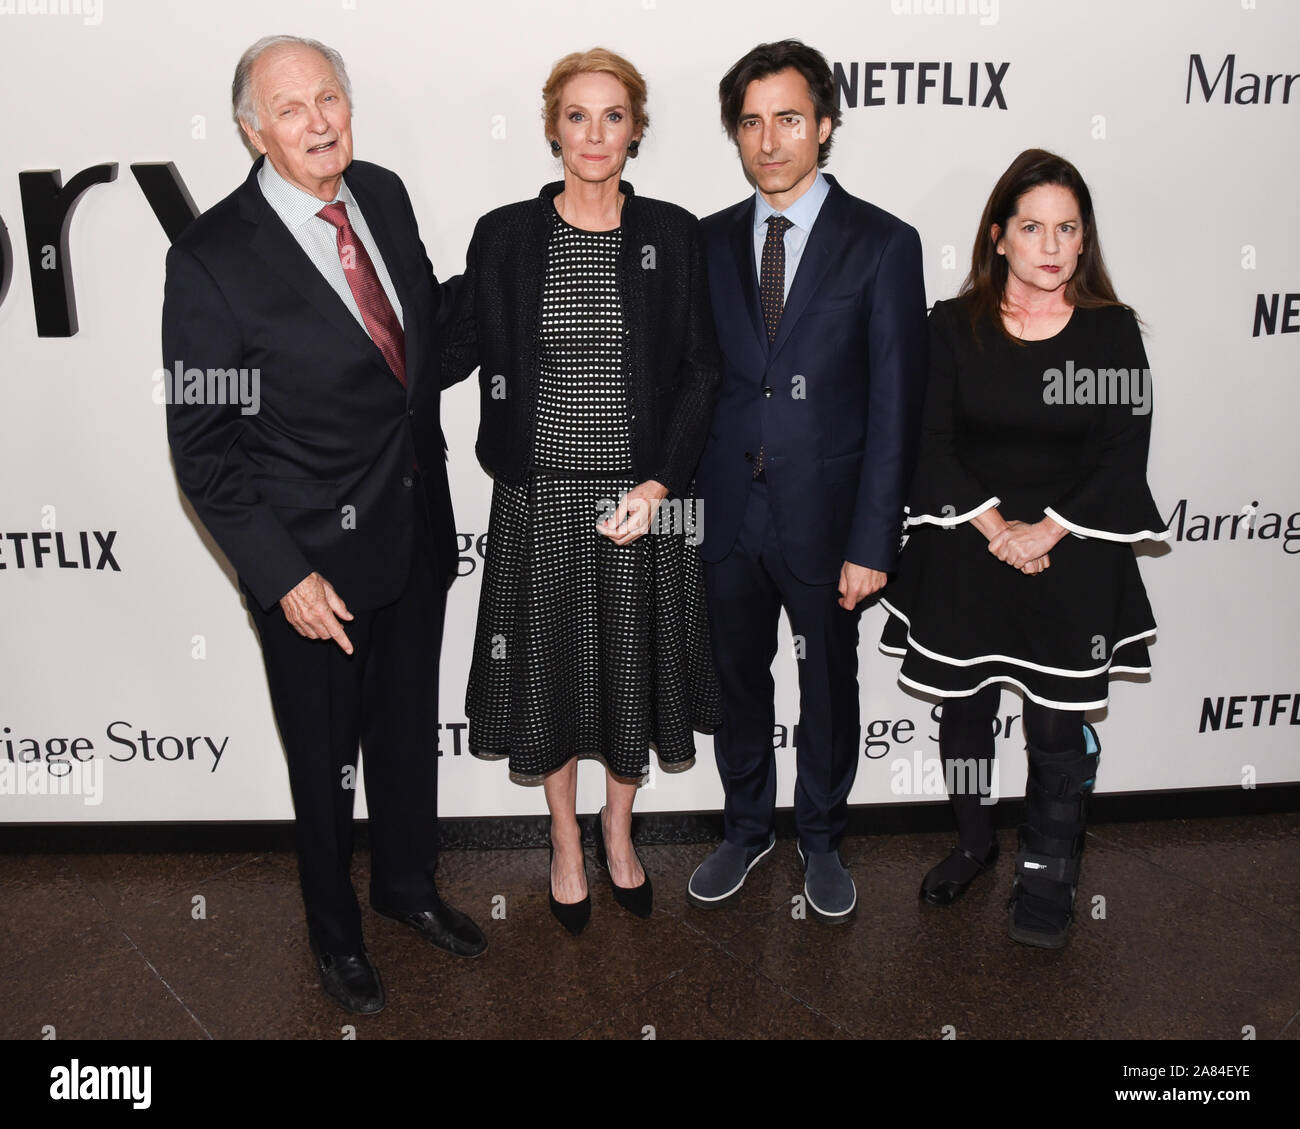 November 5, 2019, Los Angeles, California, USA: Alan Alda, Julie Hagerty, Noah Baumbach and Martha Kelly attends Premiere Of Netflix's ''Marriage Story' (Credit Image: © Billy Bennight/ZUMA Wire) Stock Photo